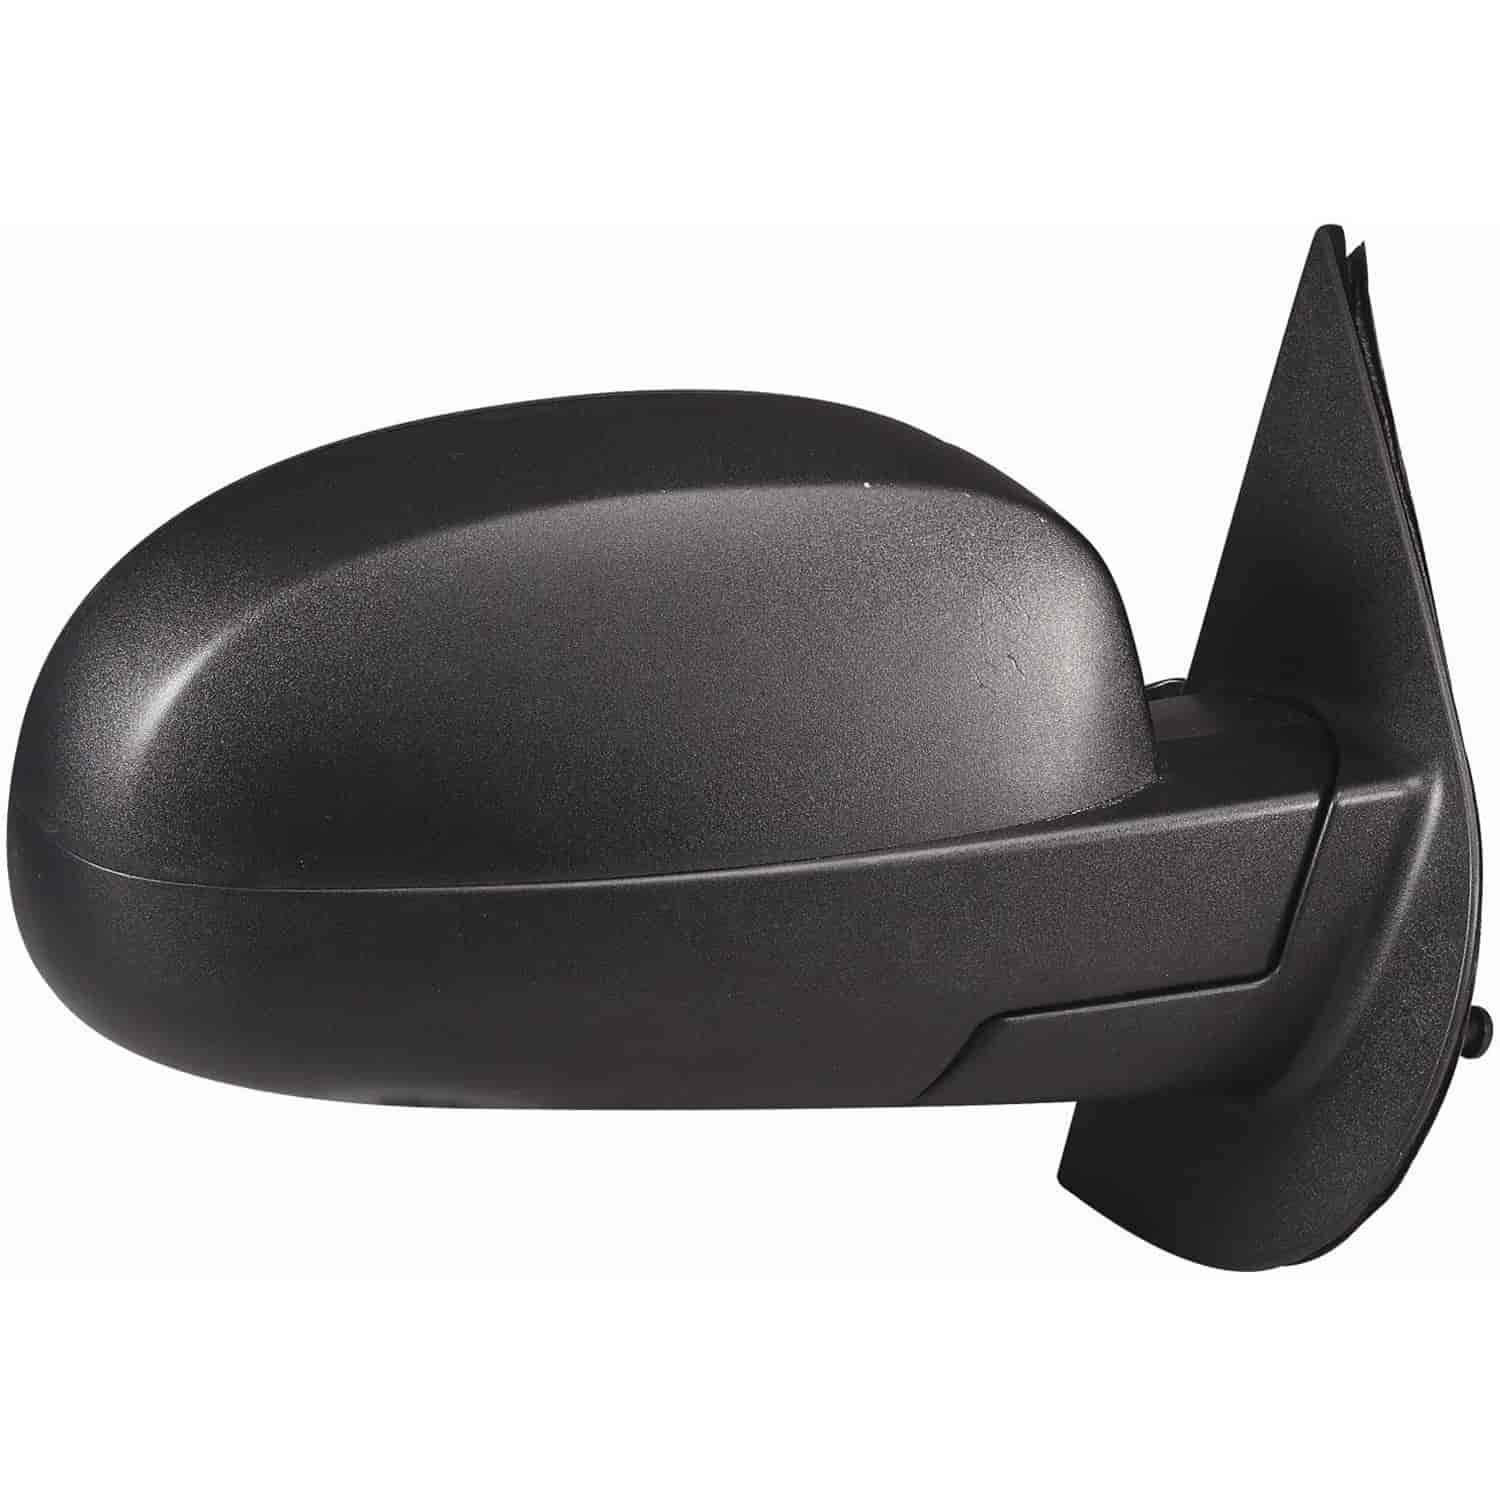 OEM Style Replacement Mirror Fits Chevy Avalanche, Silverado,